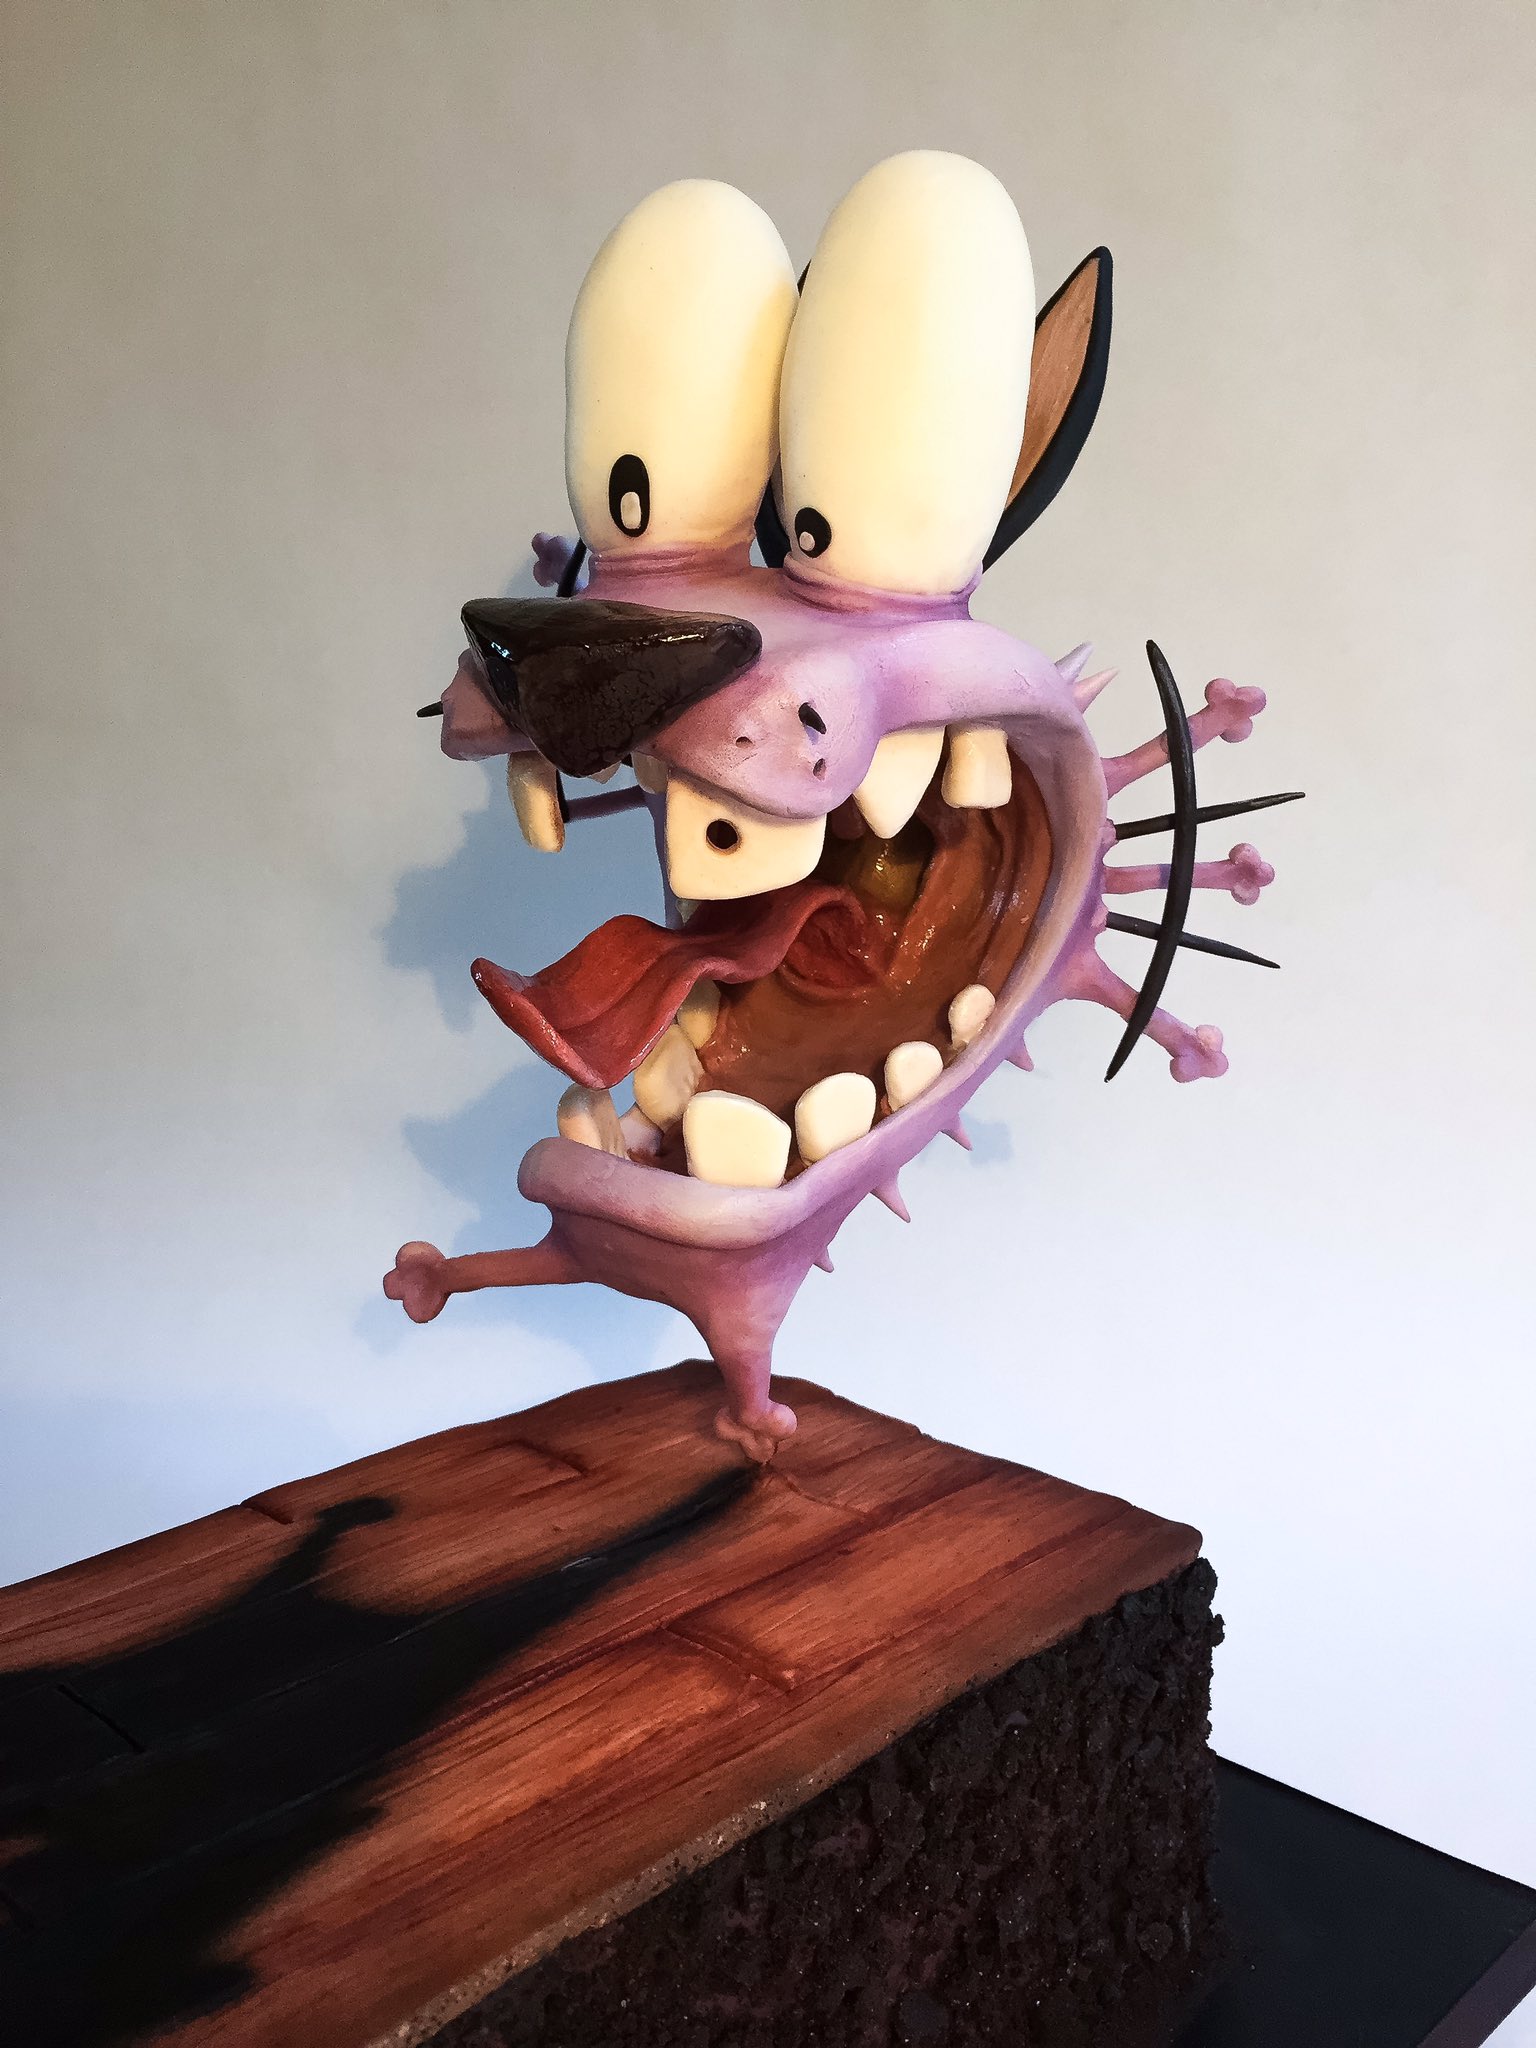 Twitter \ Natalie Sideserf على تويتر: "Hand-sculpted chocolate cake topper of Courage the Cowardly Dog 💜 More cakes at https://t.co/hH4Y6fKIOo https://t.co/3TdYLzjPni"